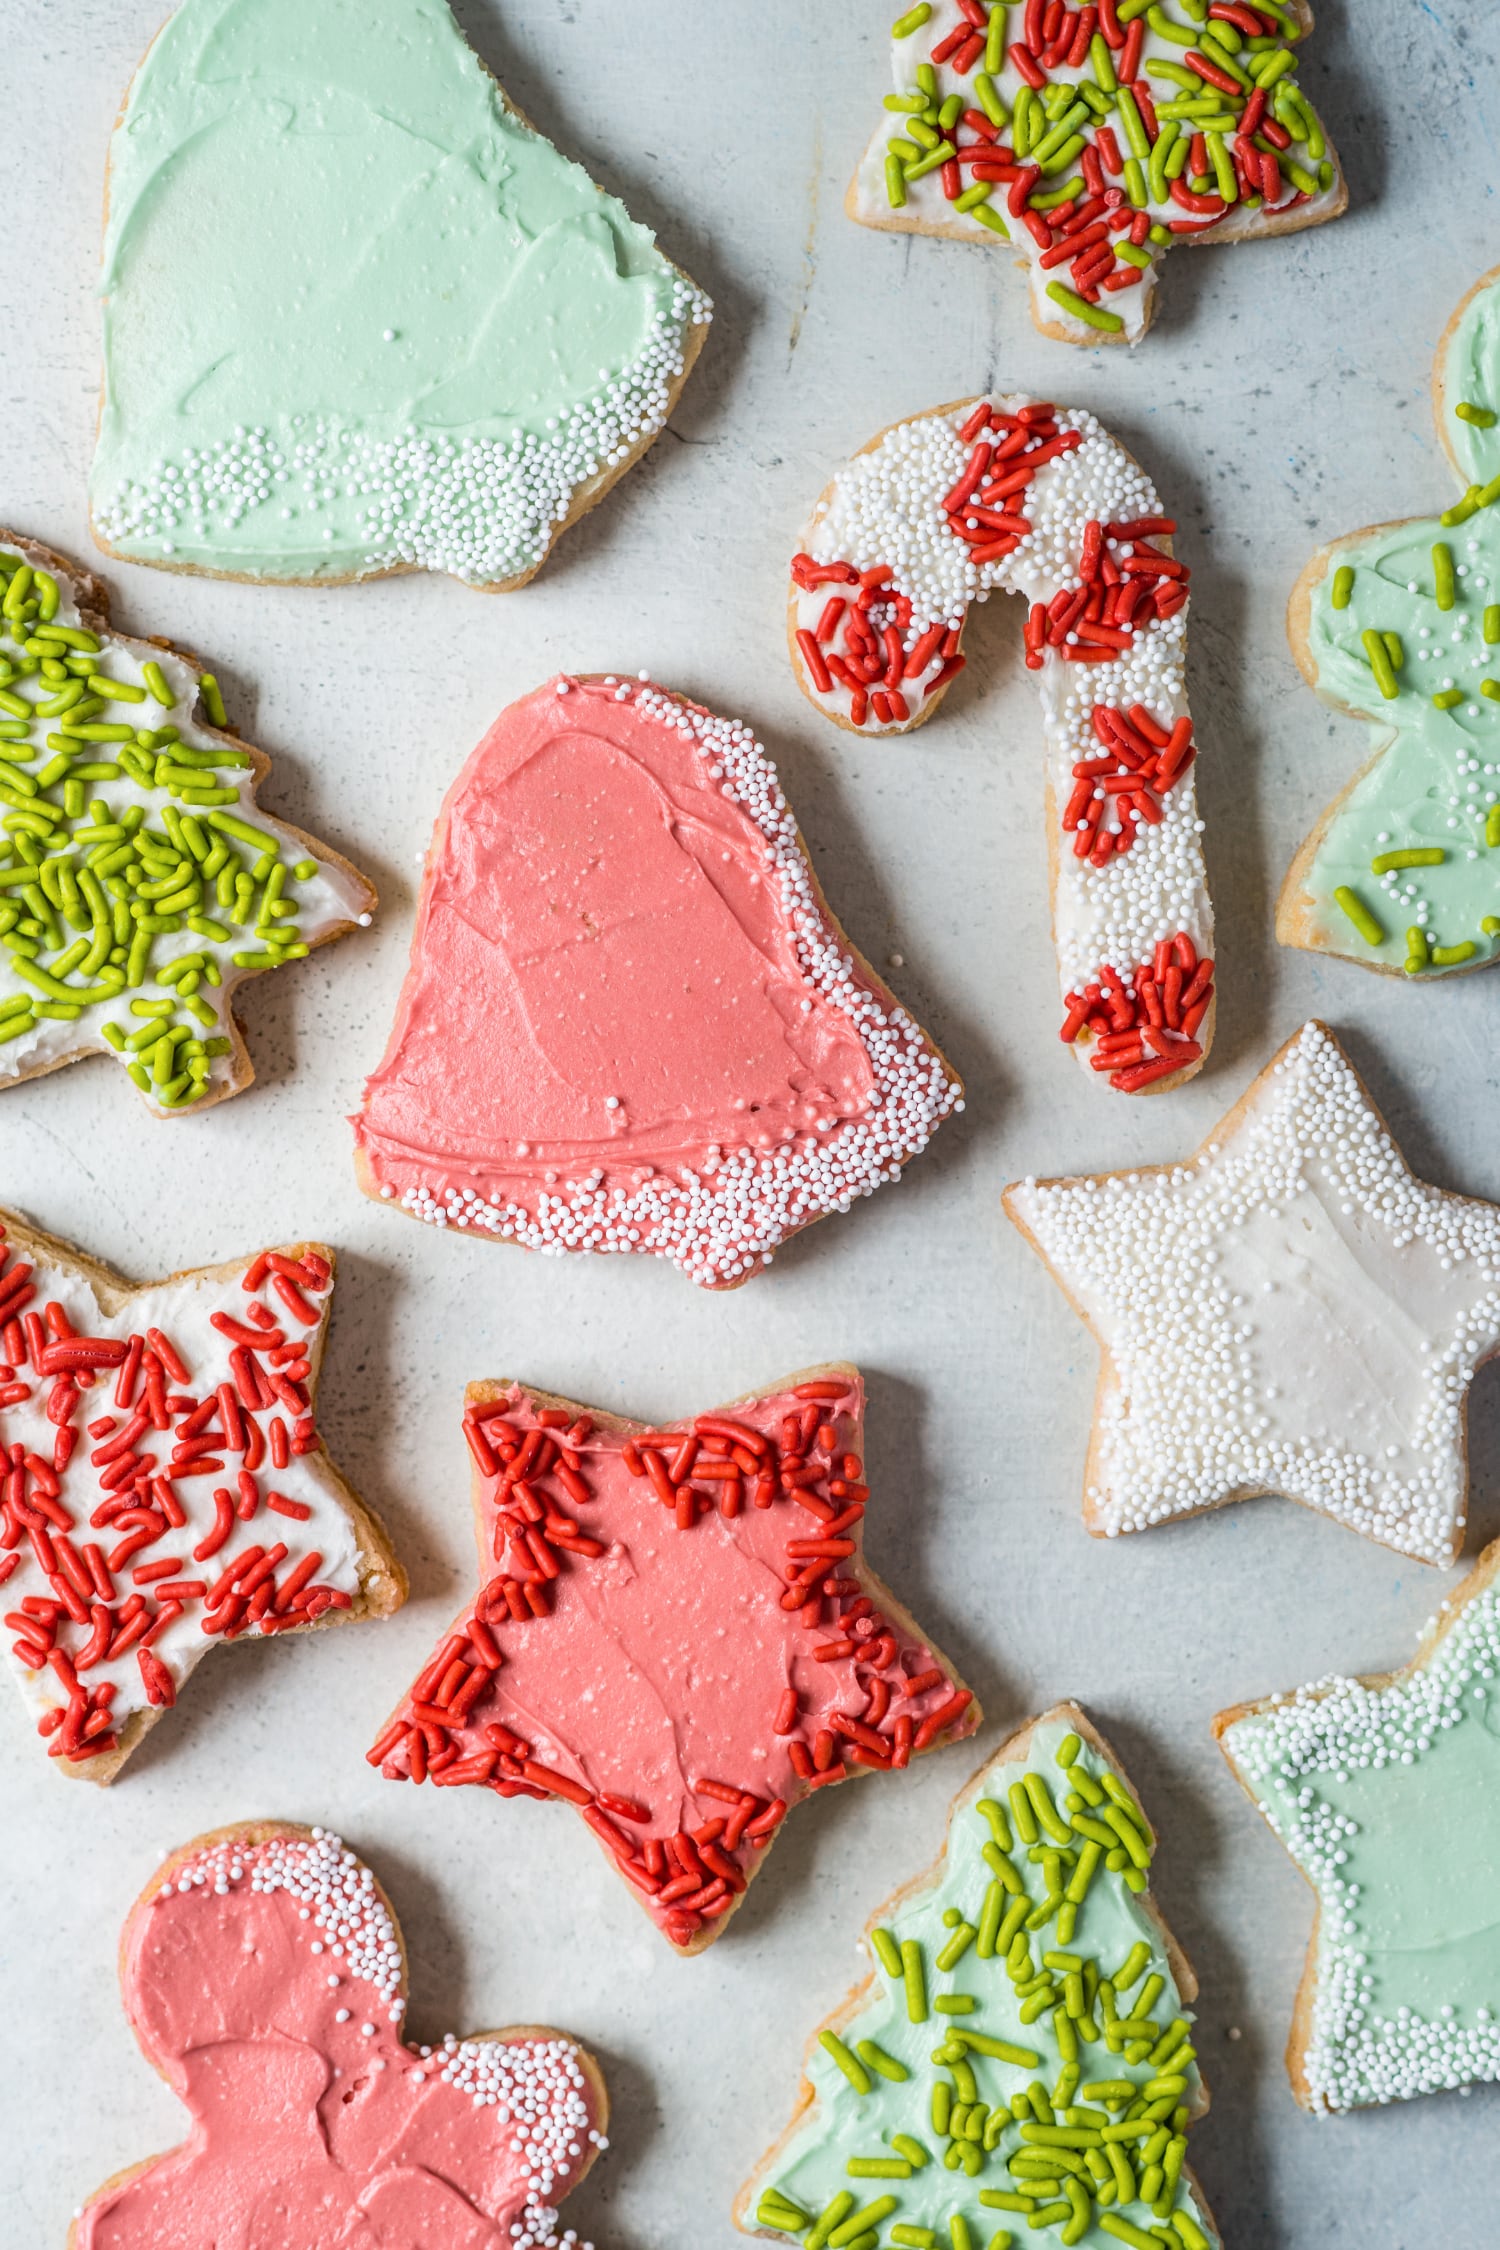 Almond flour sugar cookies cut into star, bell, and christmas tree shapes.